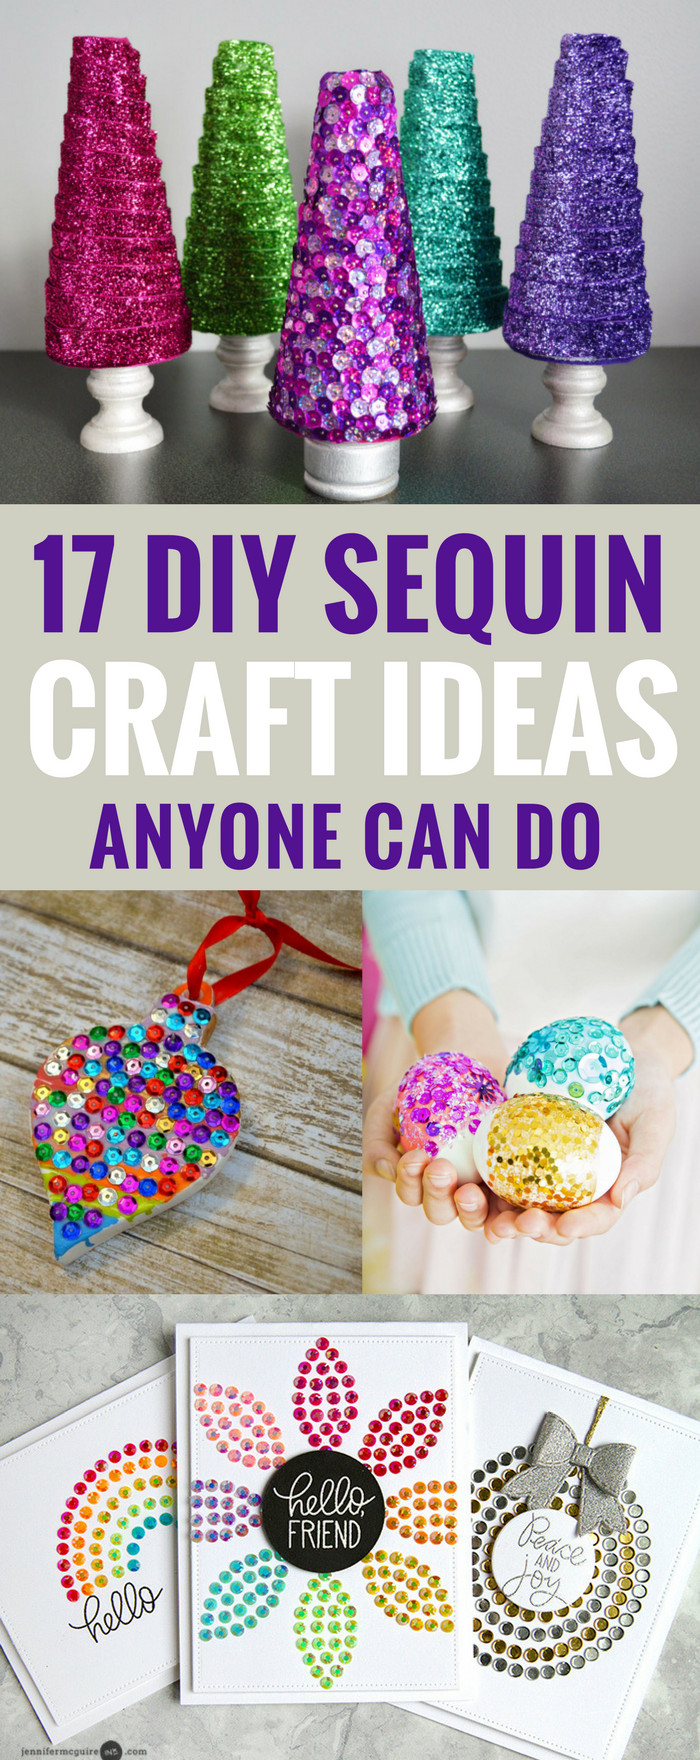 Toddler DIY Projects
 17 DIY Sequin Crafts Ideas Anyone Can Do